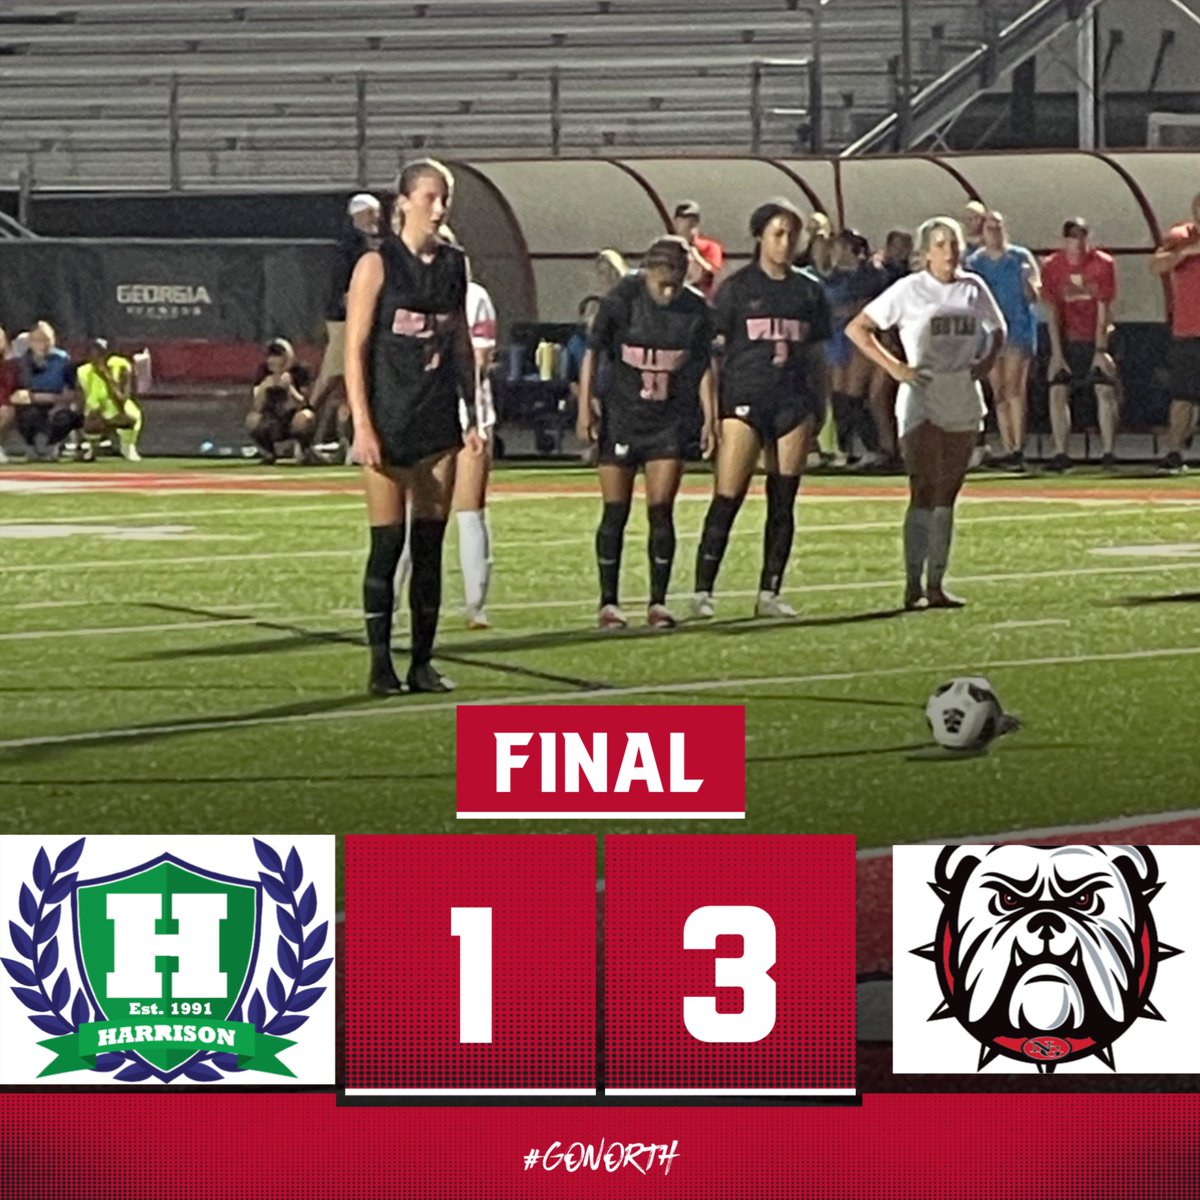 Girls Soccer beats Harrison to advance to the Final 4!